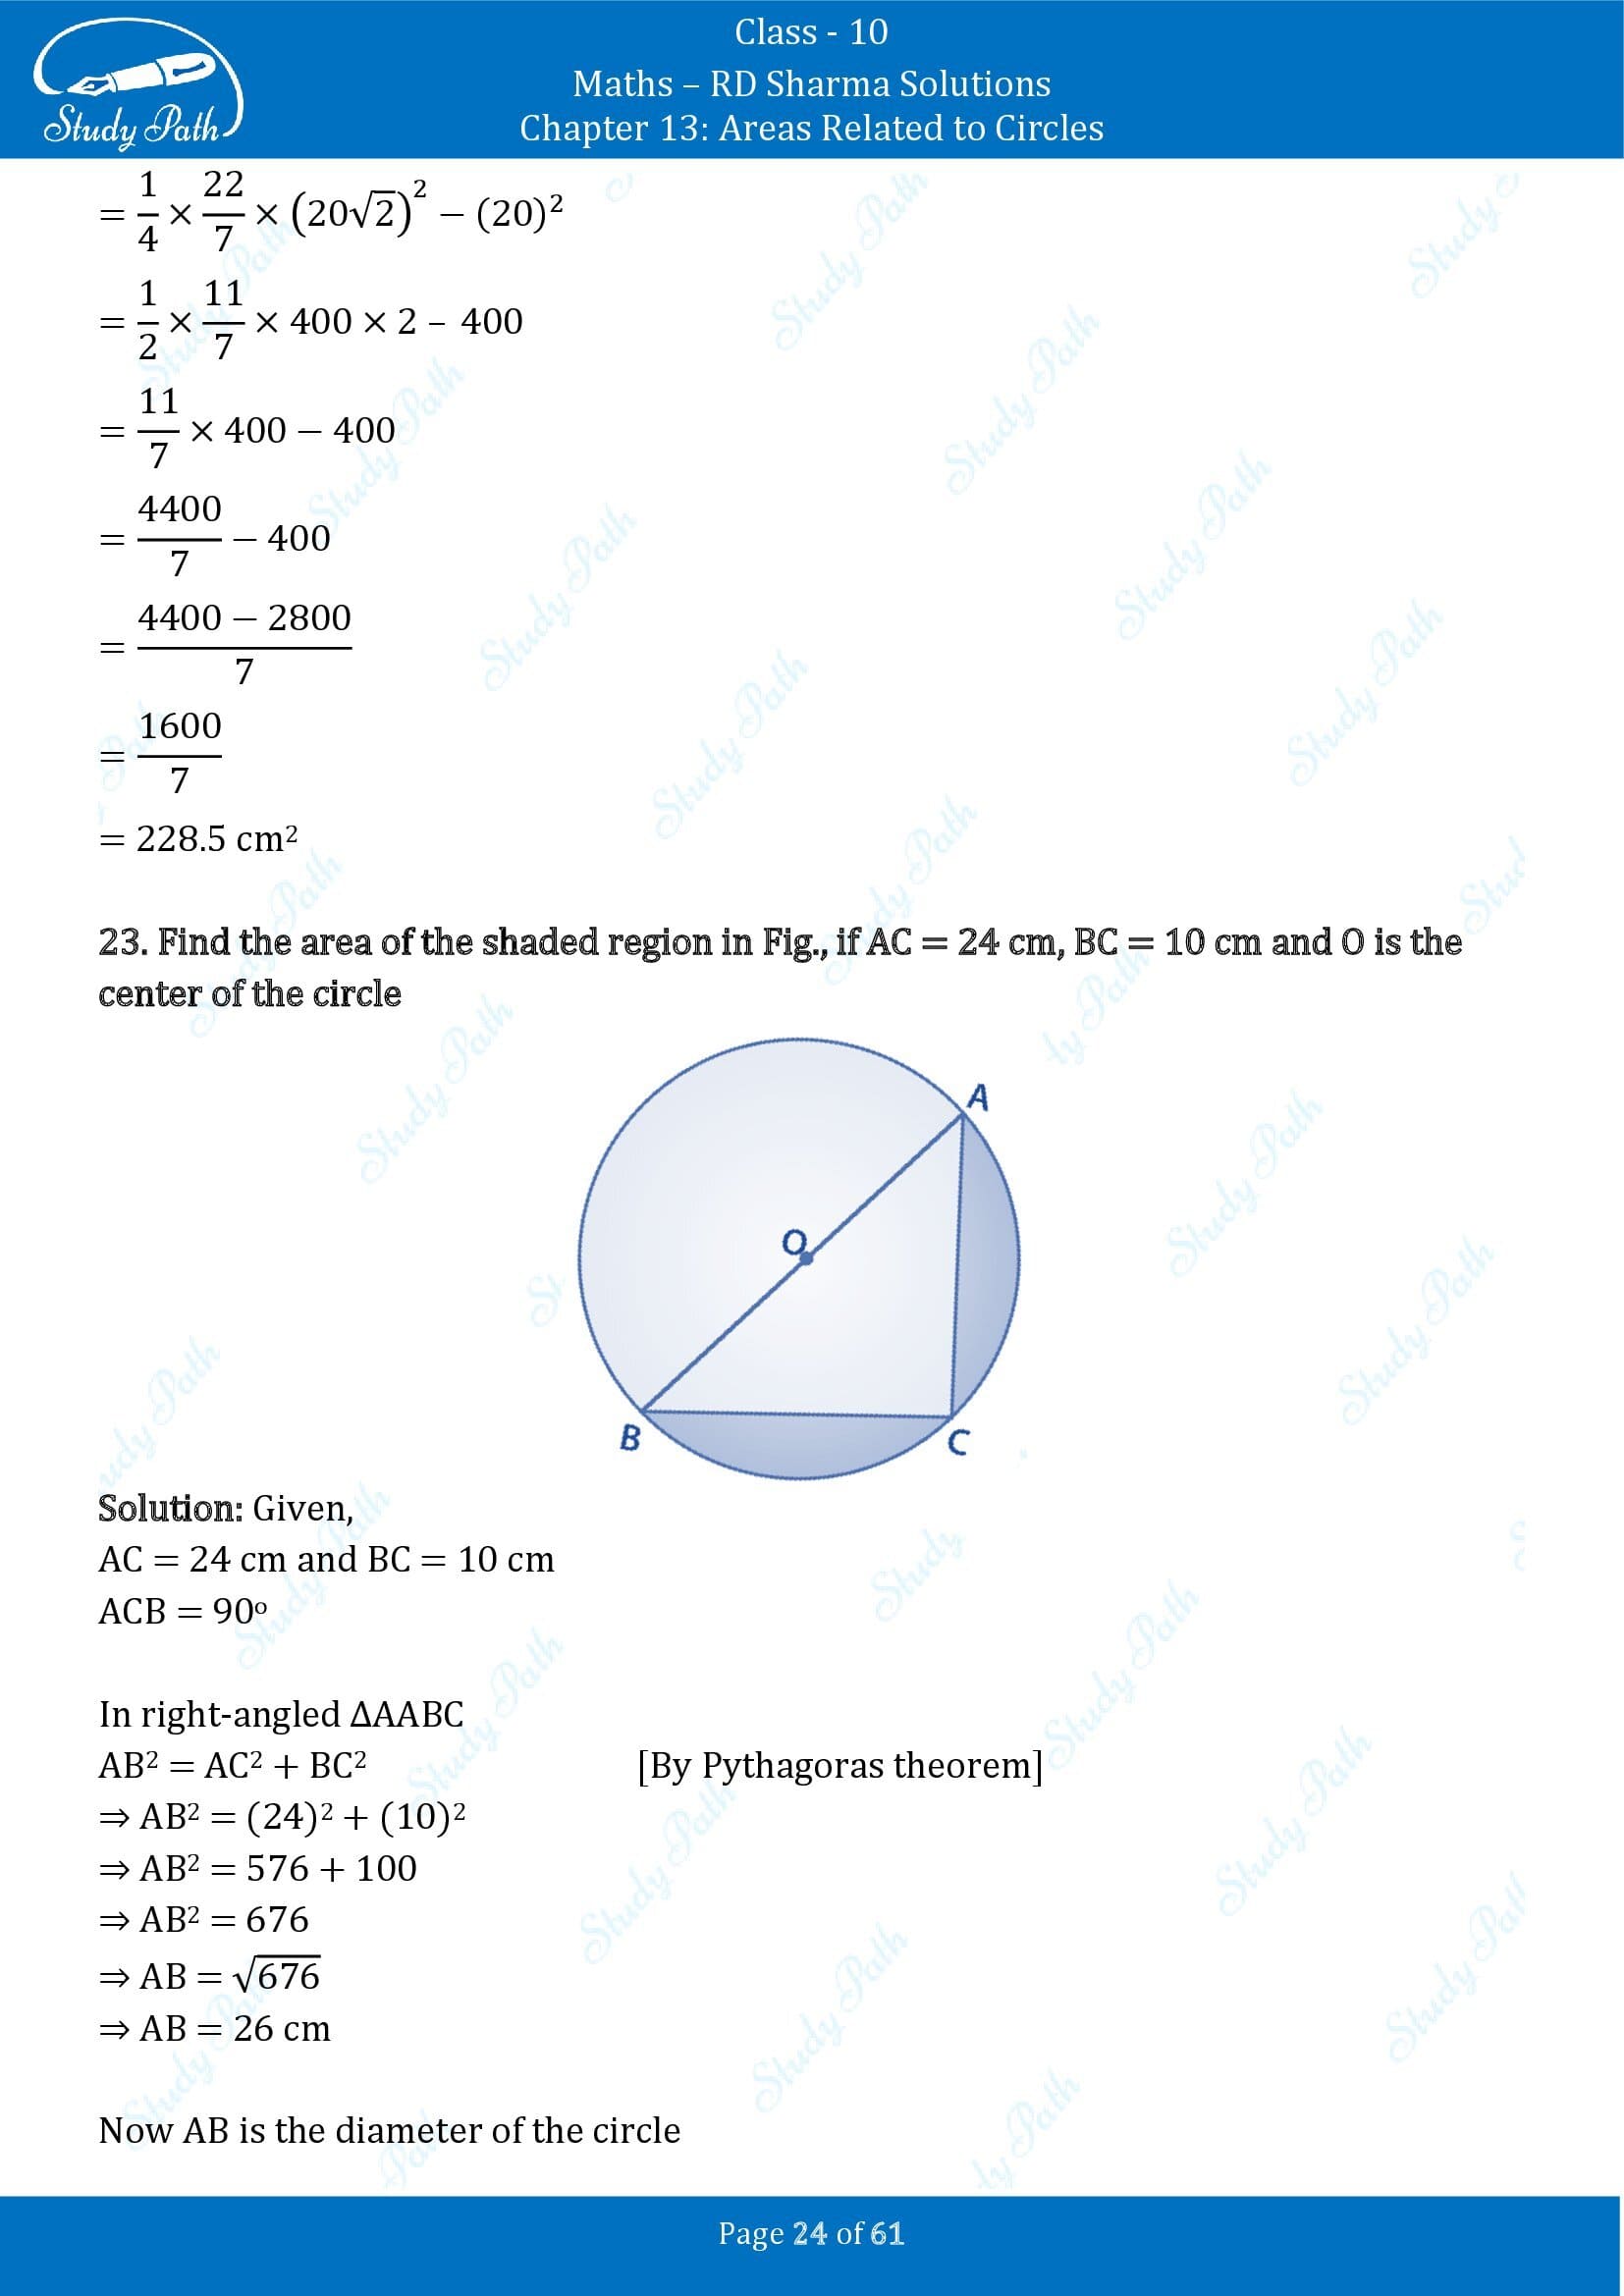 RD Sharma Solutions Class 10 Chapter 13 Areas Related to Circles Exercise 13.4 00024